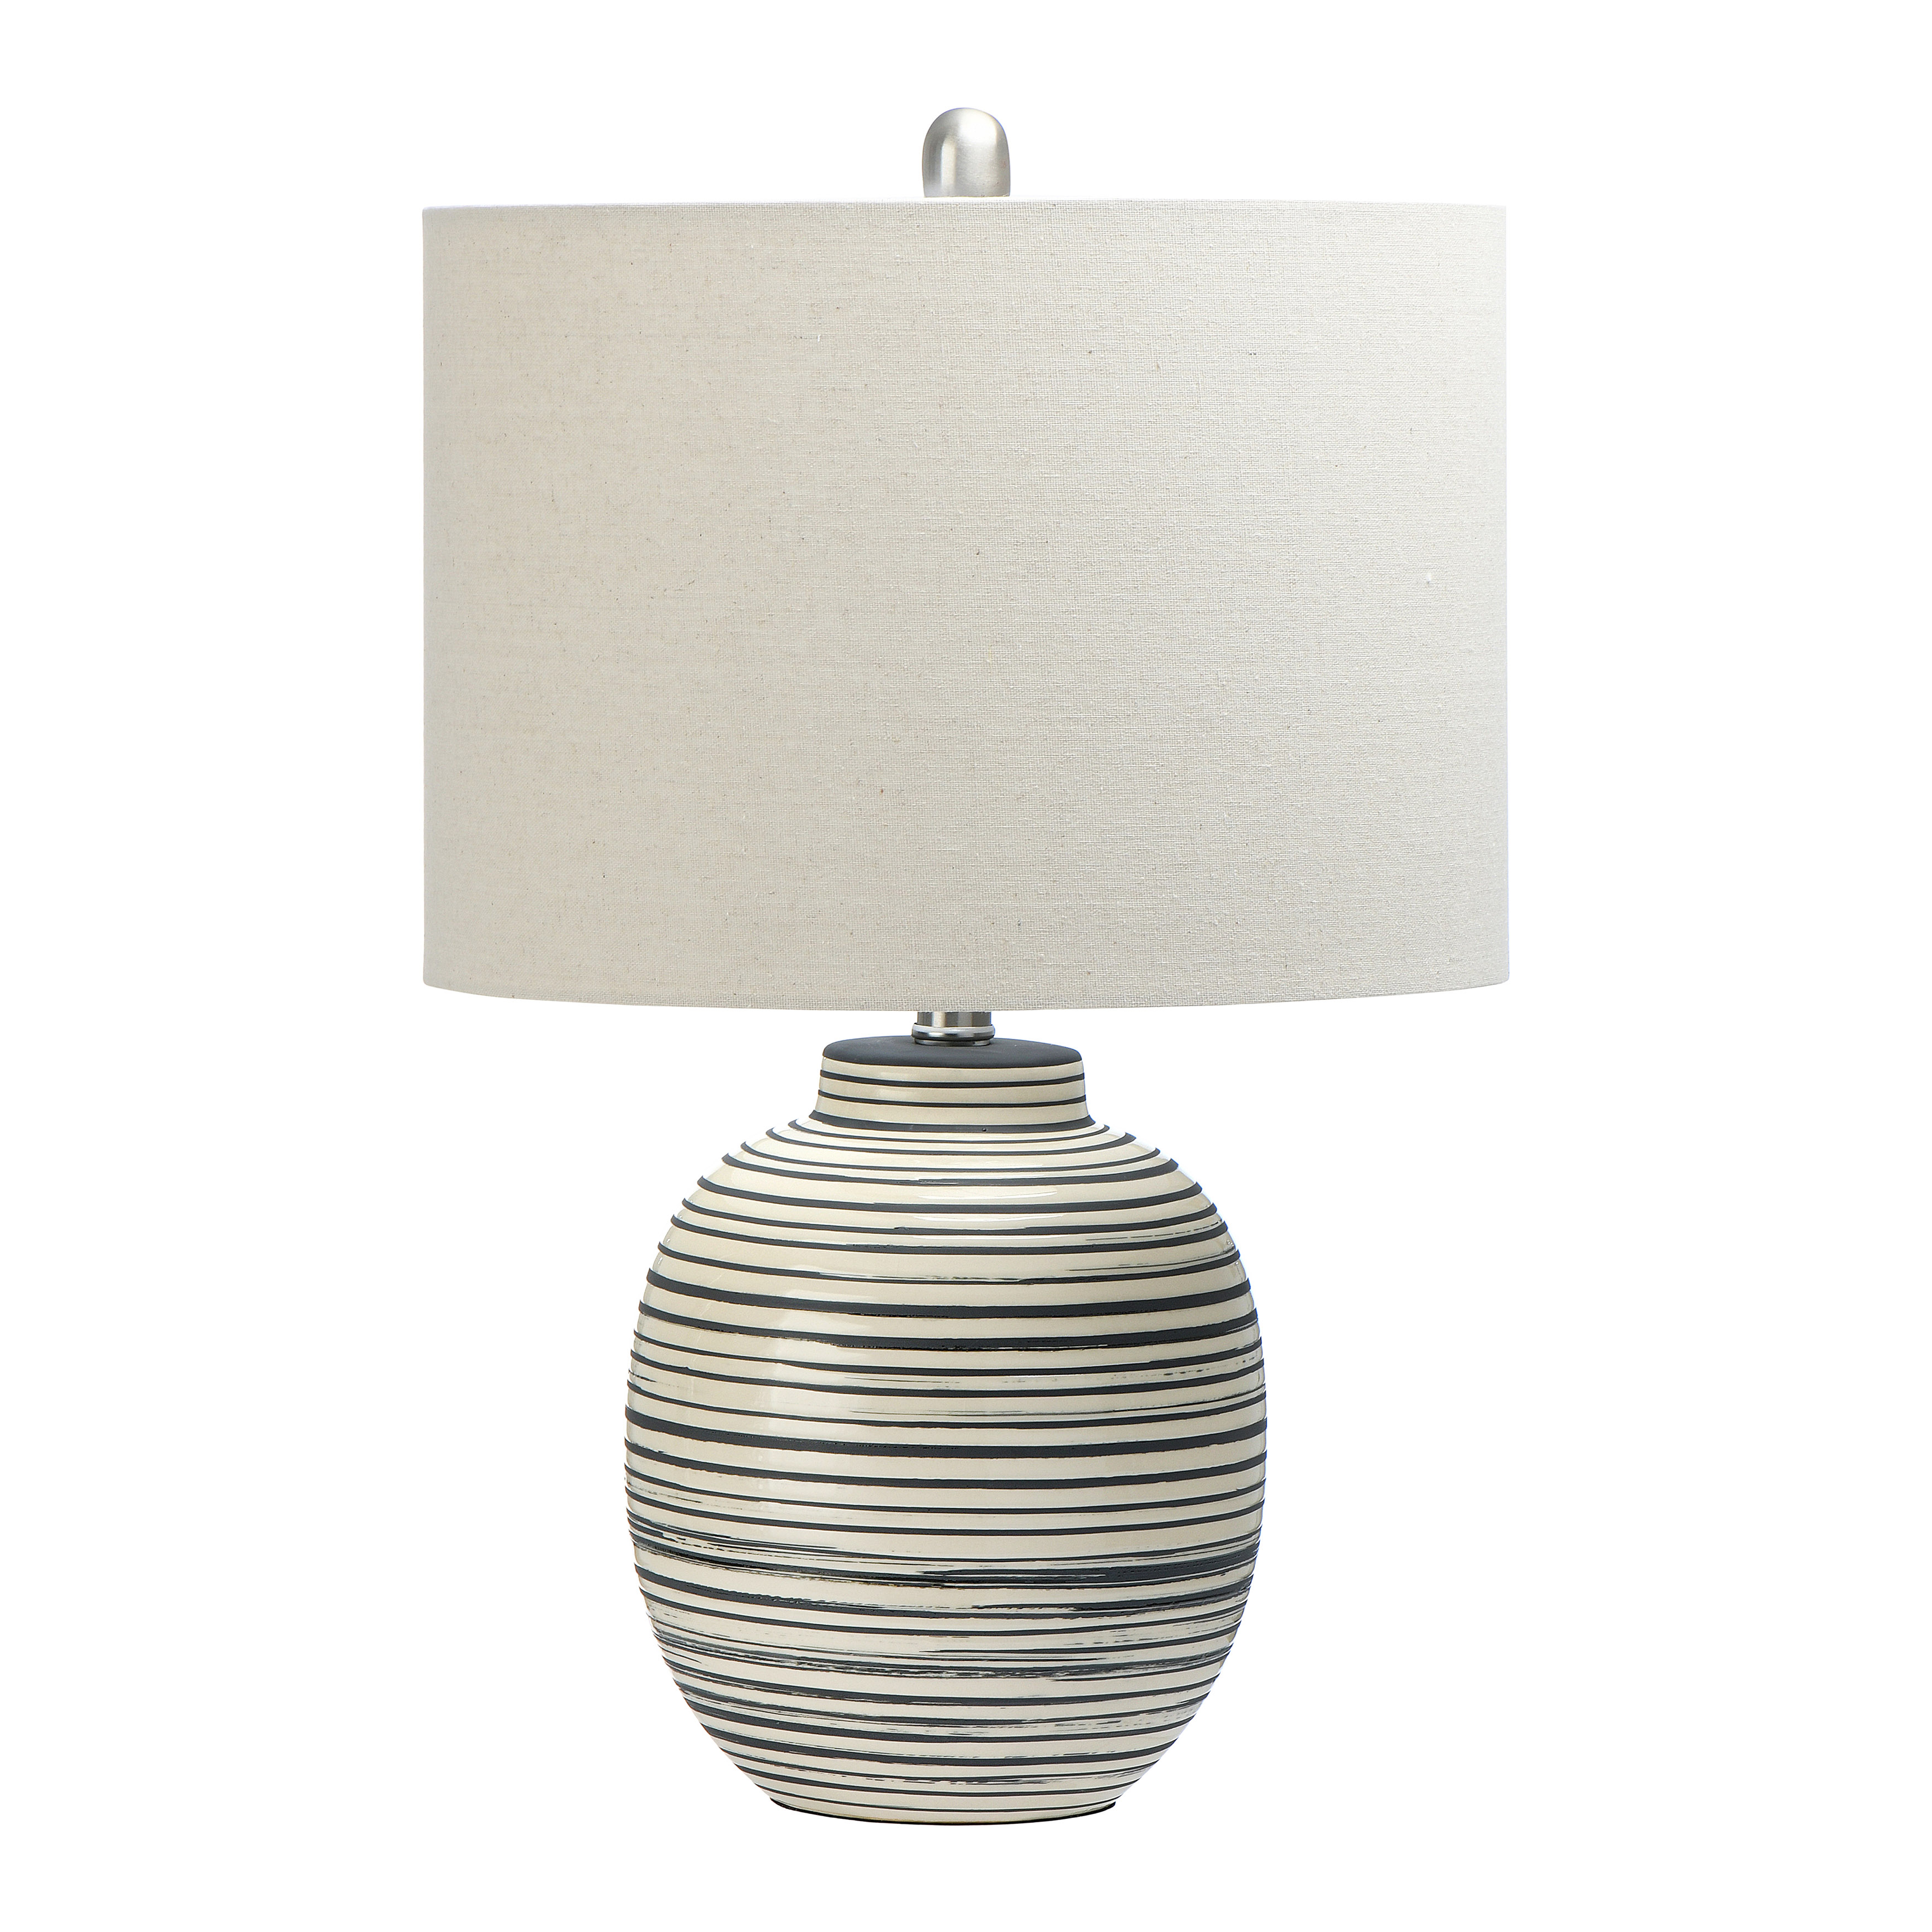 23" Ceramic Textured Striped Table Lamp - Nomad Home